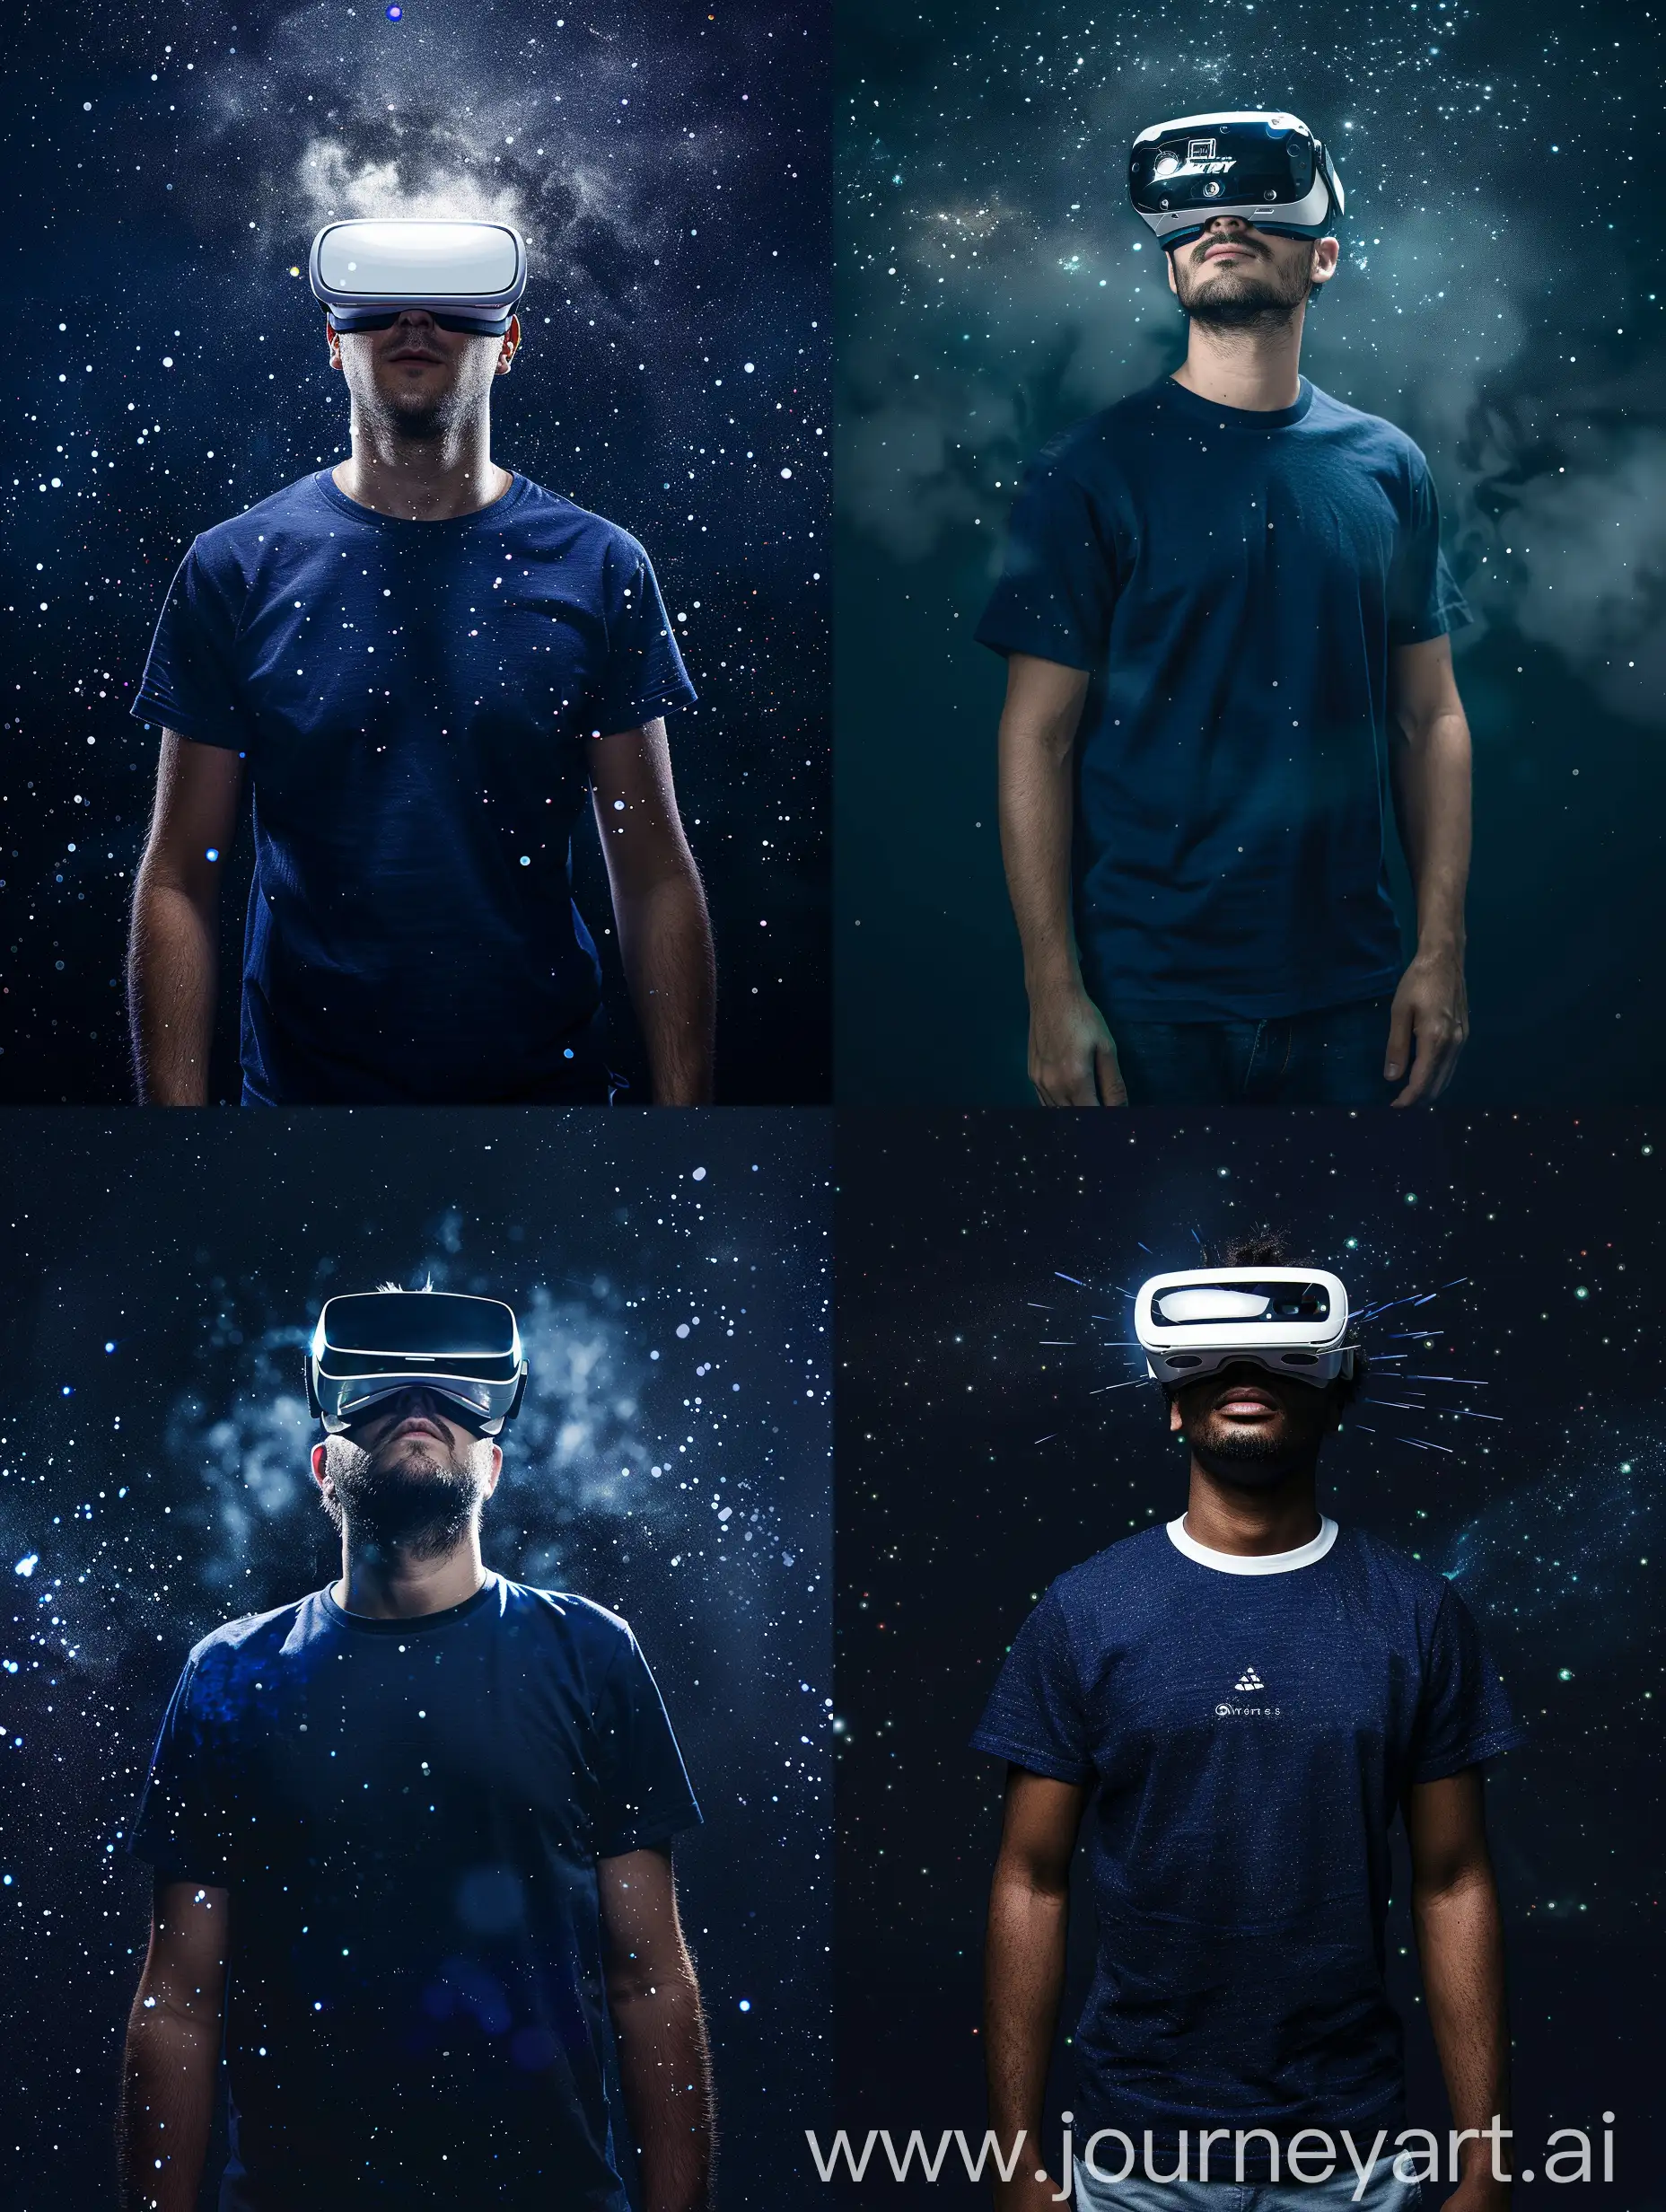 Medium Shot of a Men With VR Glasses, Navy Blue T-shirt, White Light Reflections on Men, Middle of the Frame, Galactic Dark Background, Adobe Photoshop Software, High Quality --v 6.0 --ar 3:4